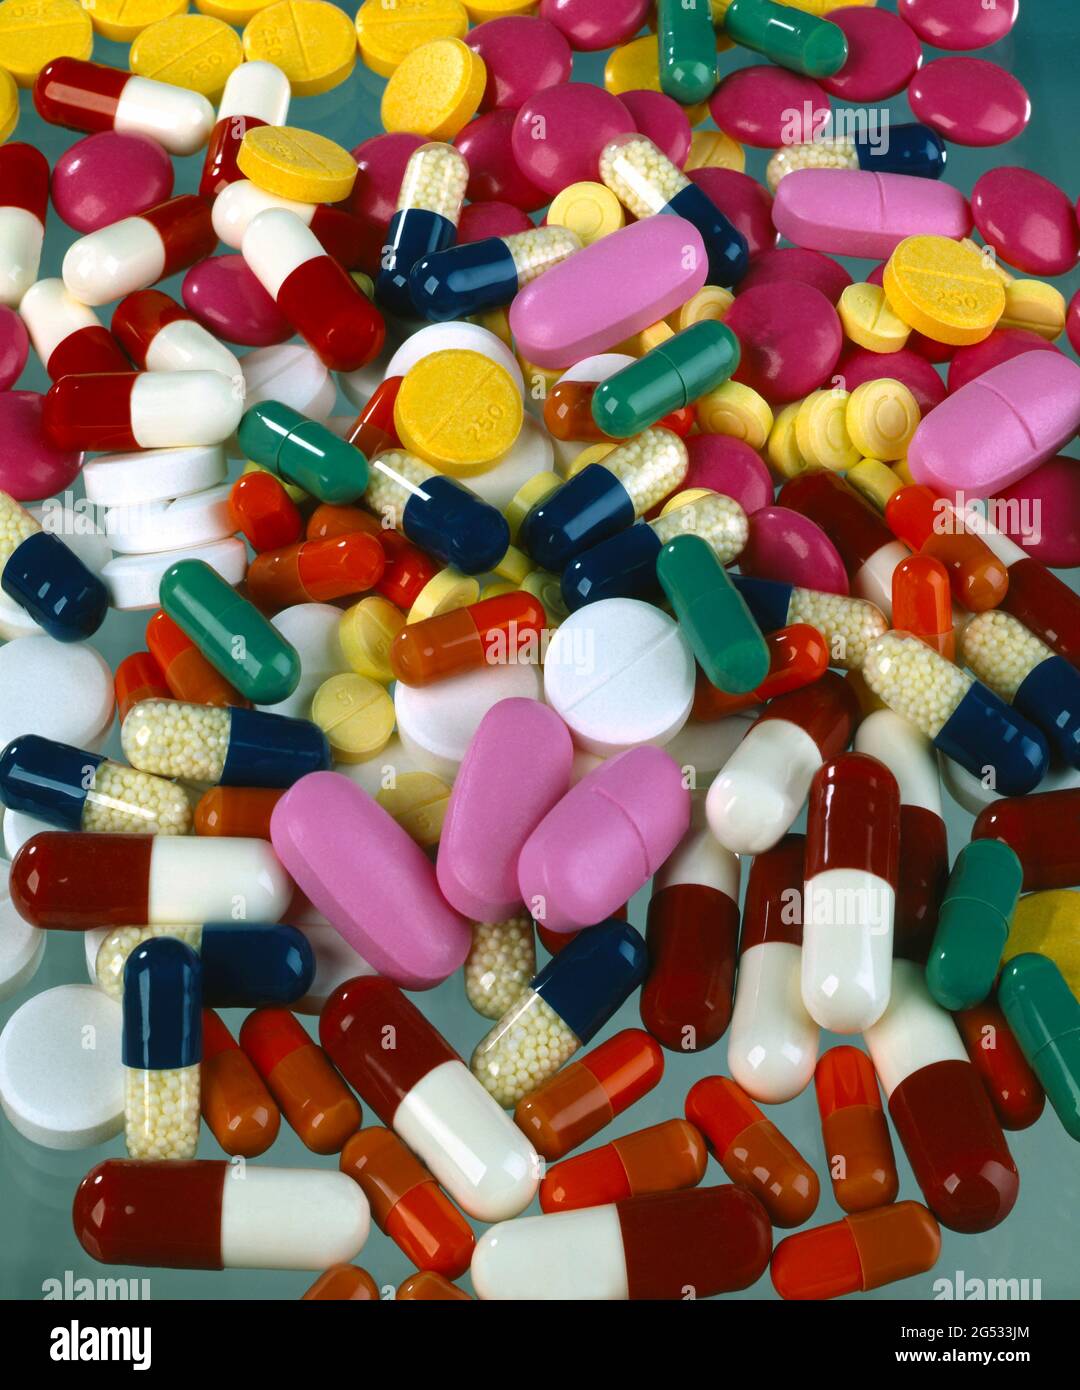 Upright/Portrait format various colourful medications capsules & tablets no brand names visible Stock Photo